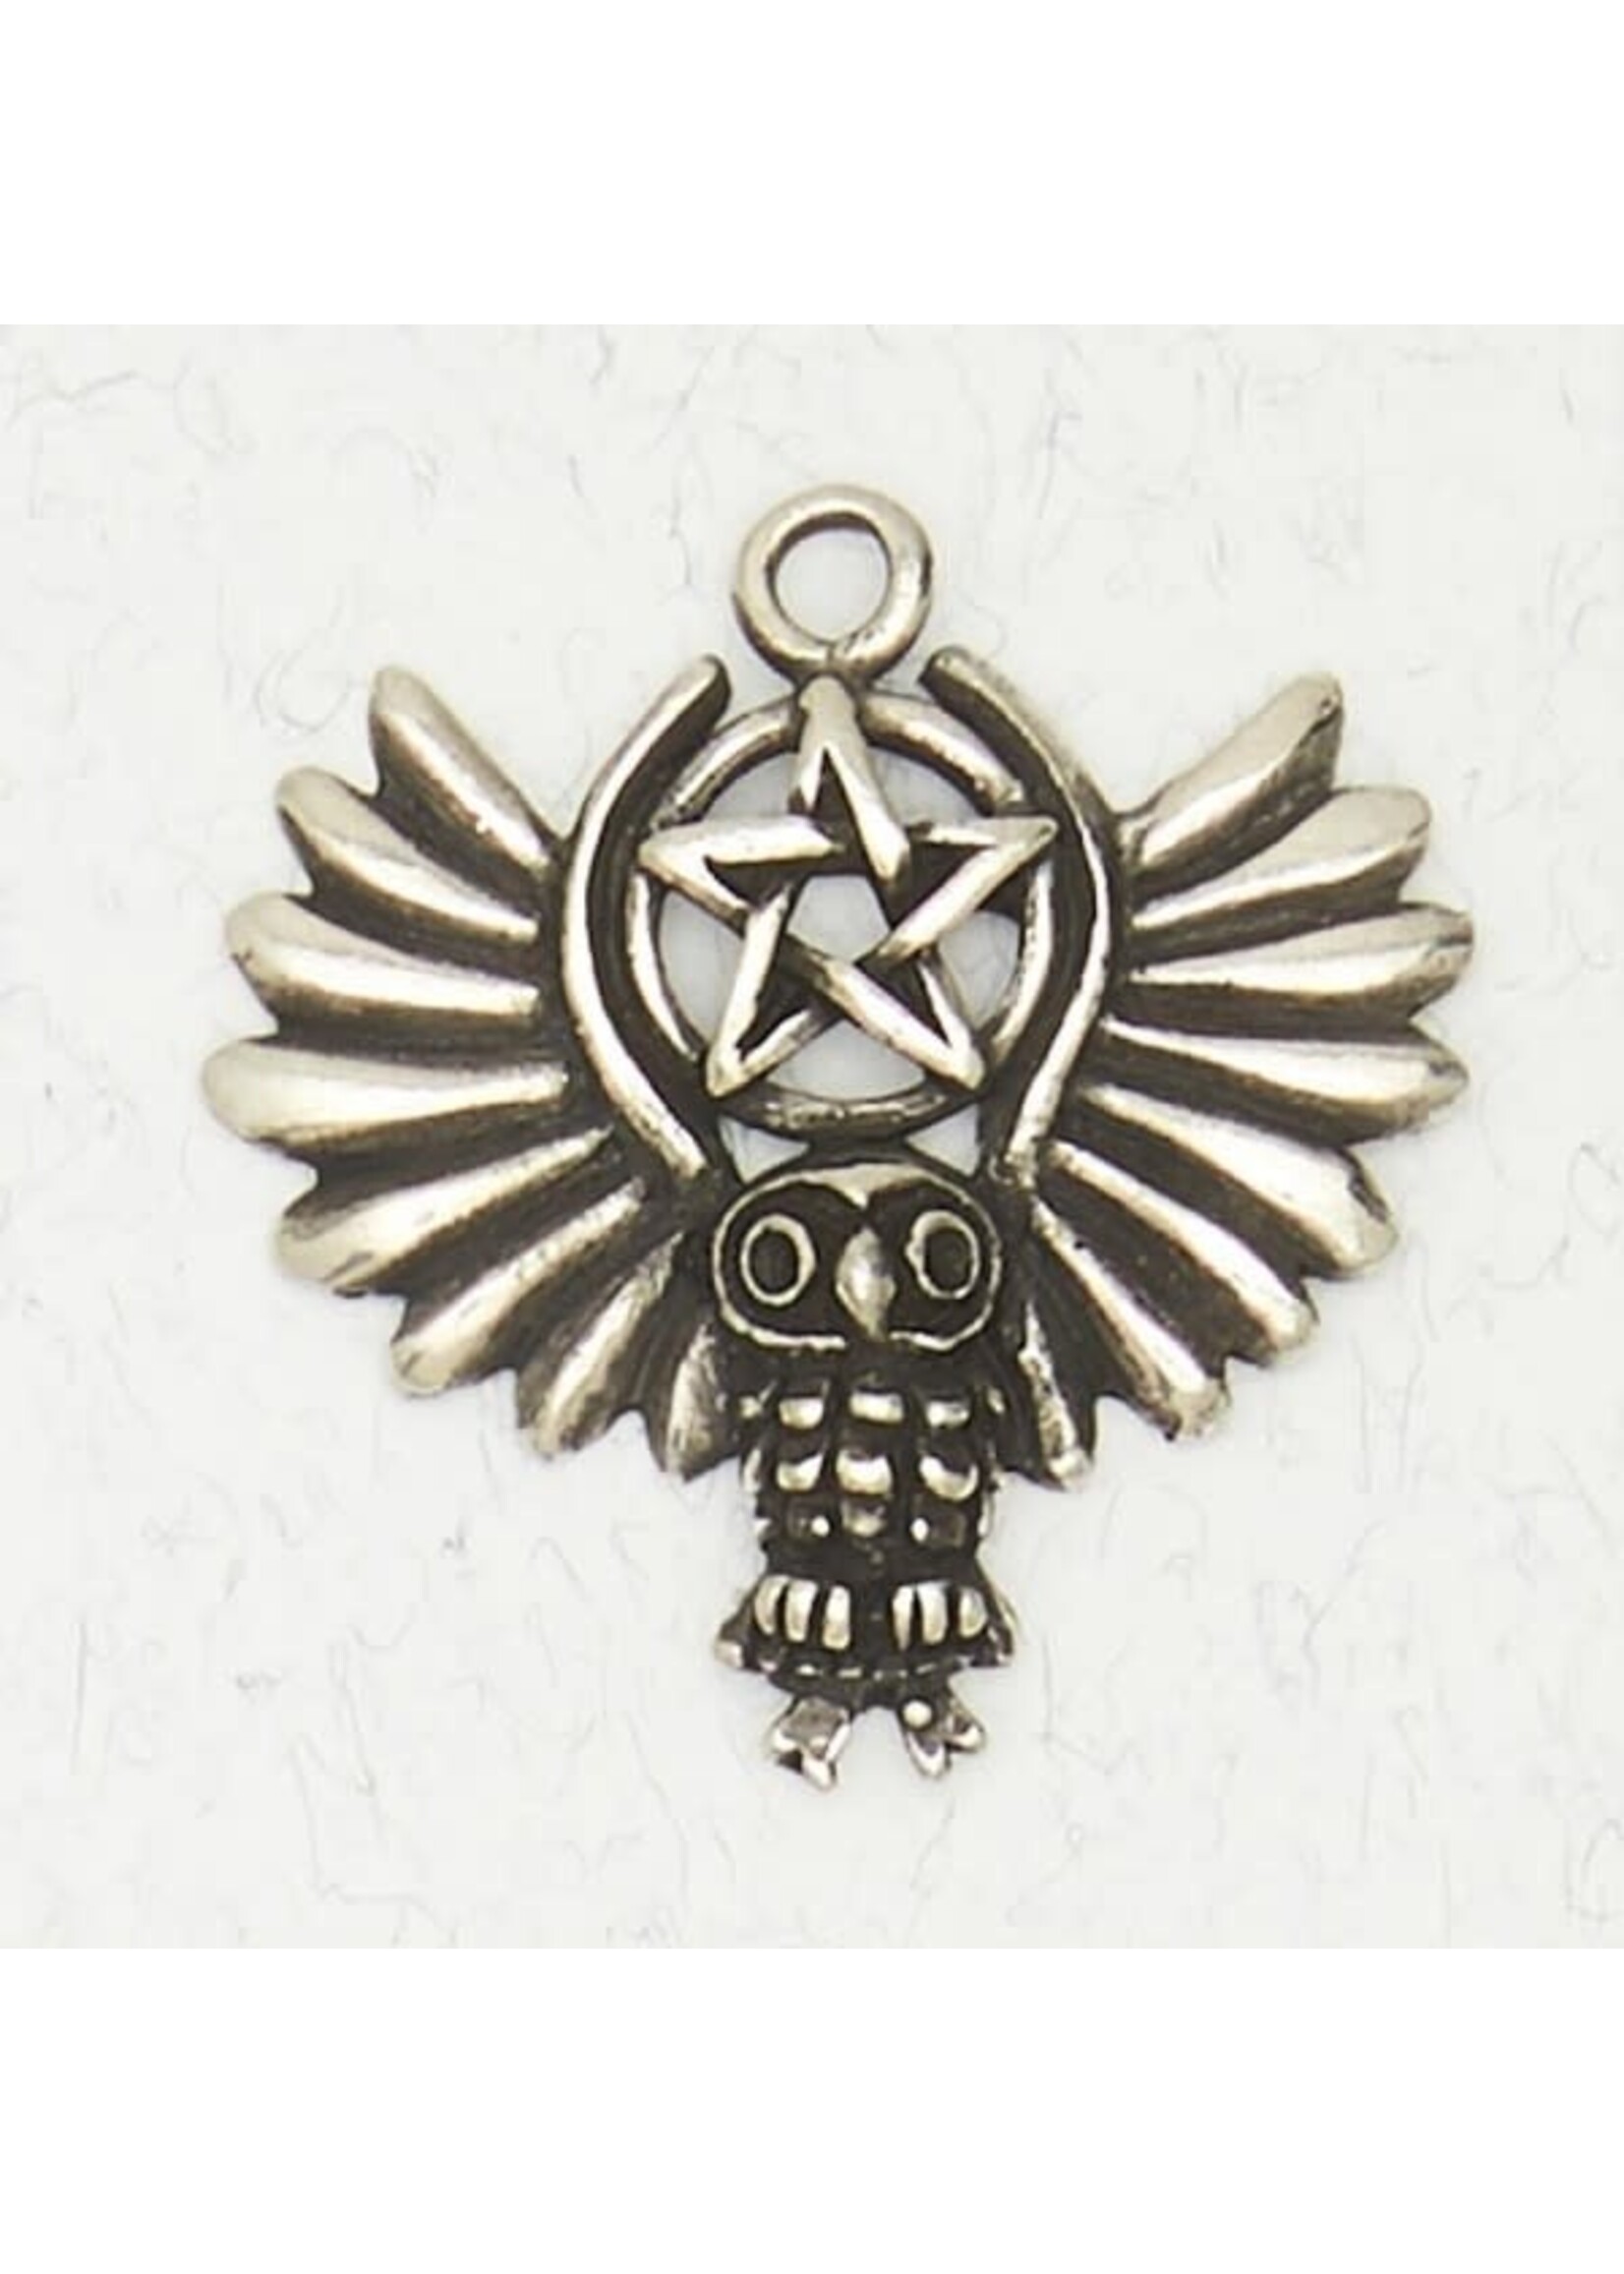 Wicca Pewter Pendant - Owl Pentacle